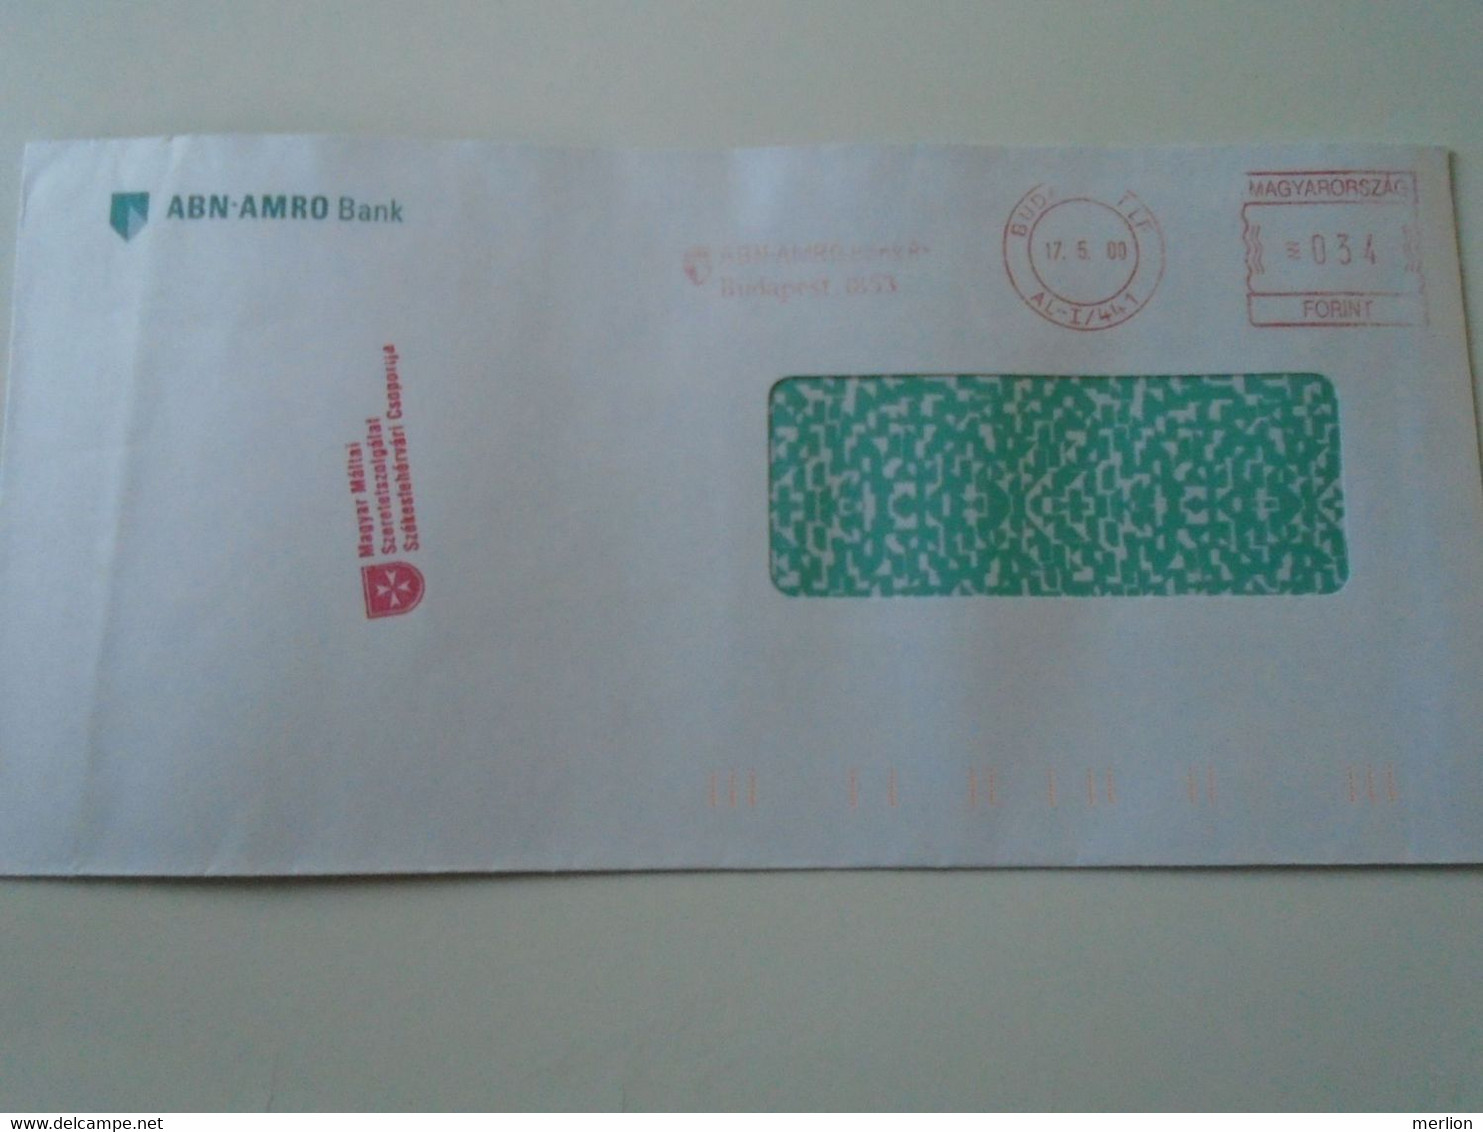 AD00012.116  Hungary Cover  -EMA Red Meter Freistempel-  Ca 2000   Budapest  ABN AMRO  Bank - Maltese Charity Service - Automaatzegels [ATM]